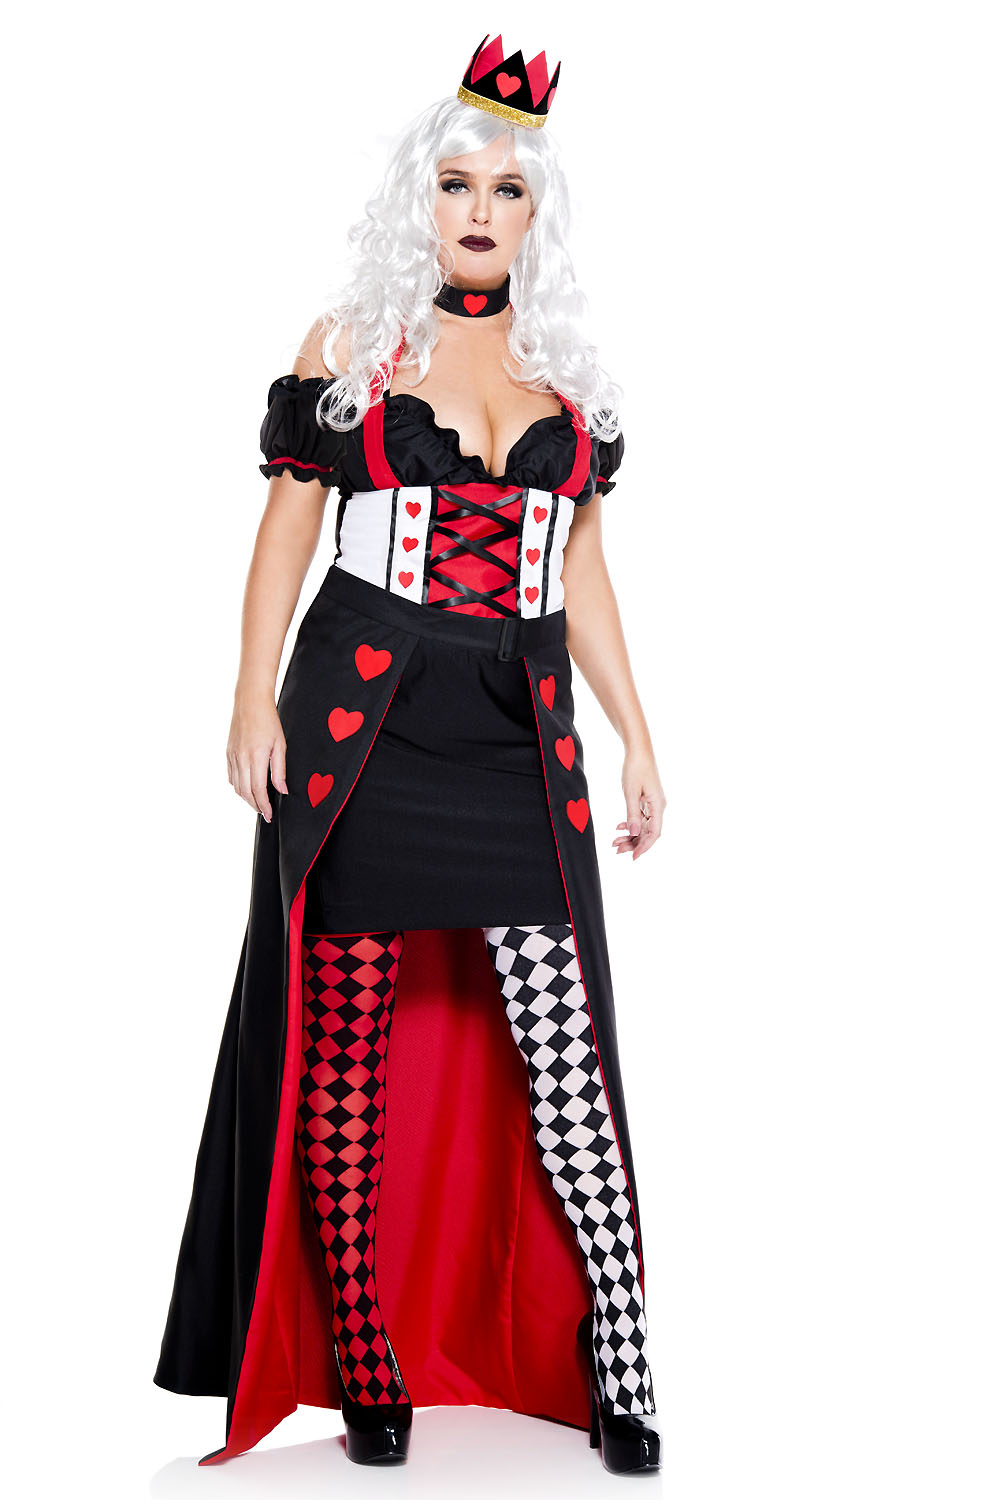 Adult Plus Enchanting Royal Heart Queen Woman Costume | $56.99 | The Costume Land